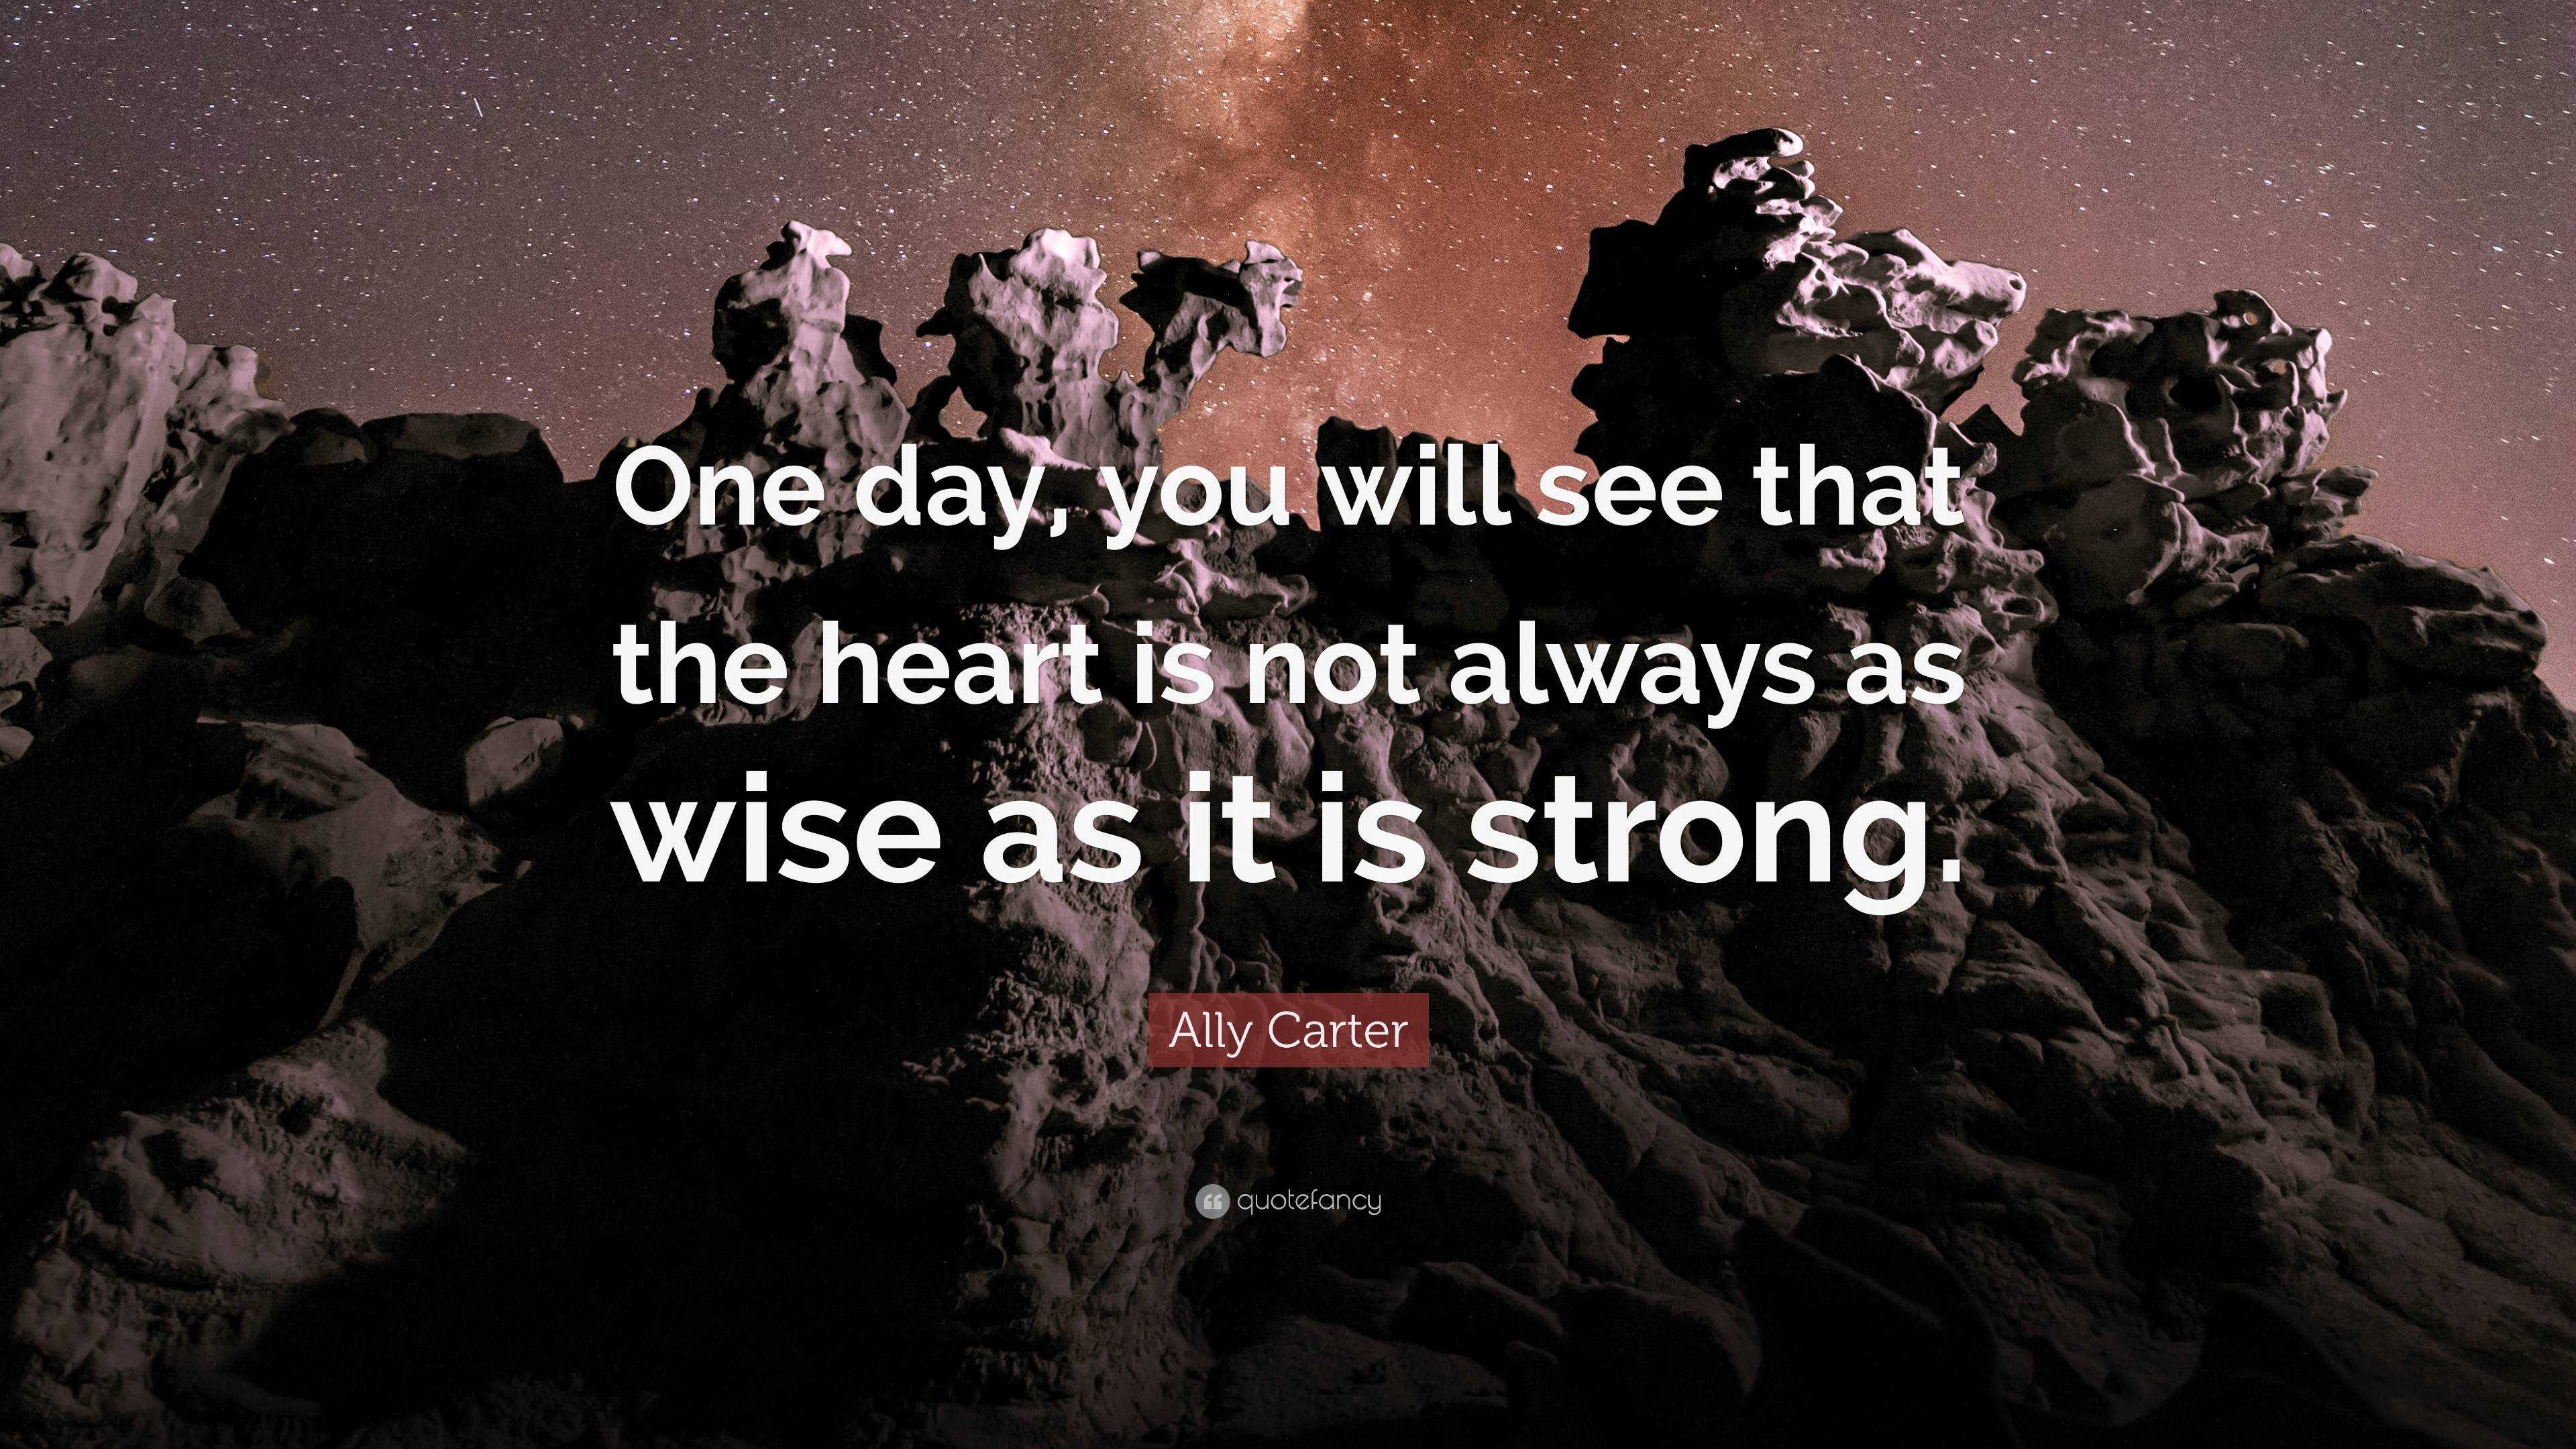 Ally Carter Quote: “One day, you will see that the heart is not always as  wise